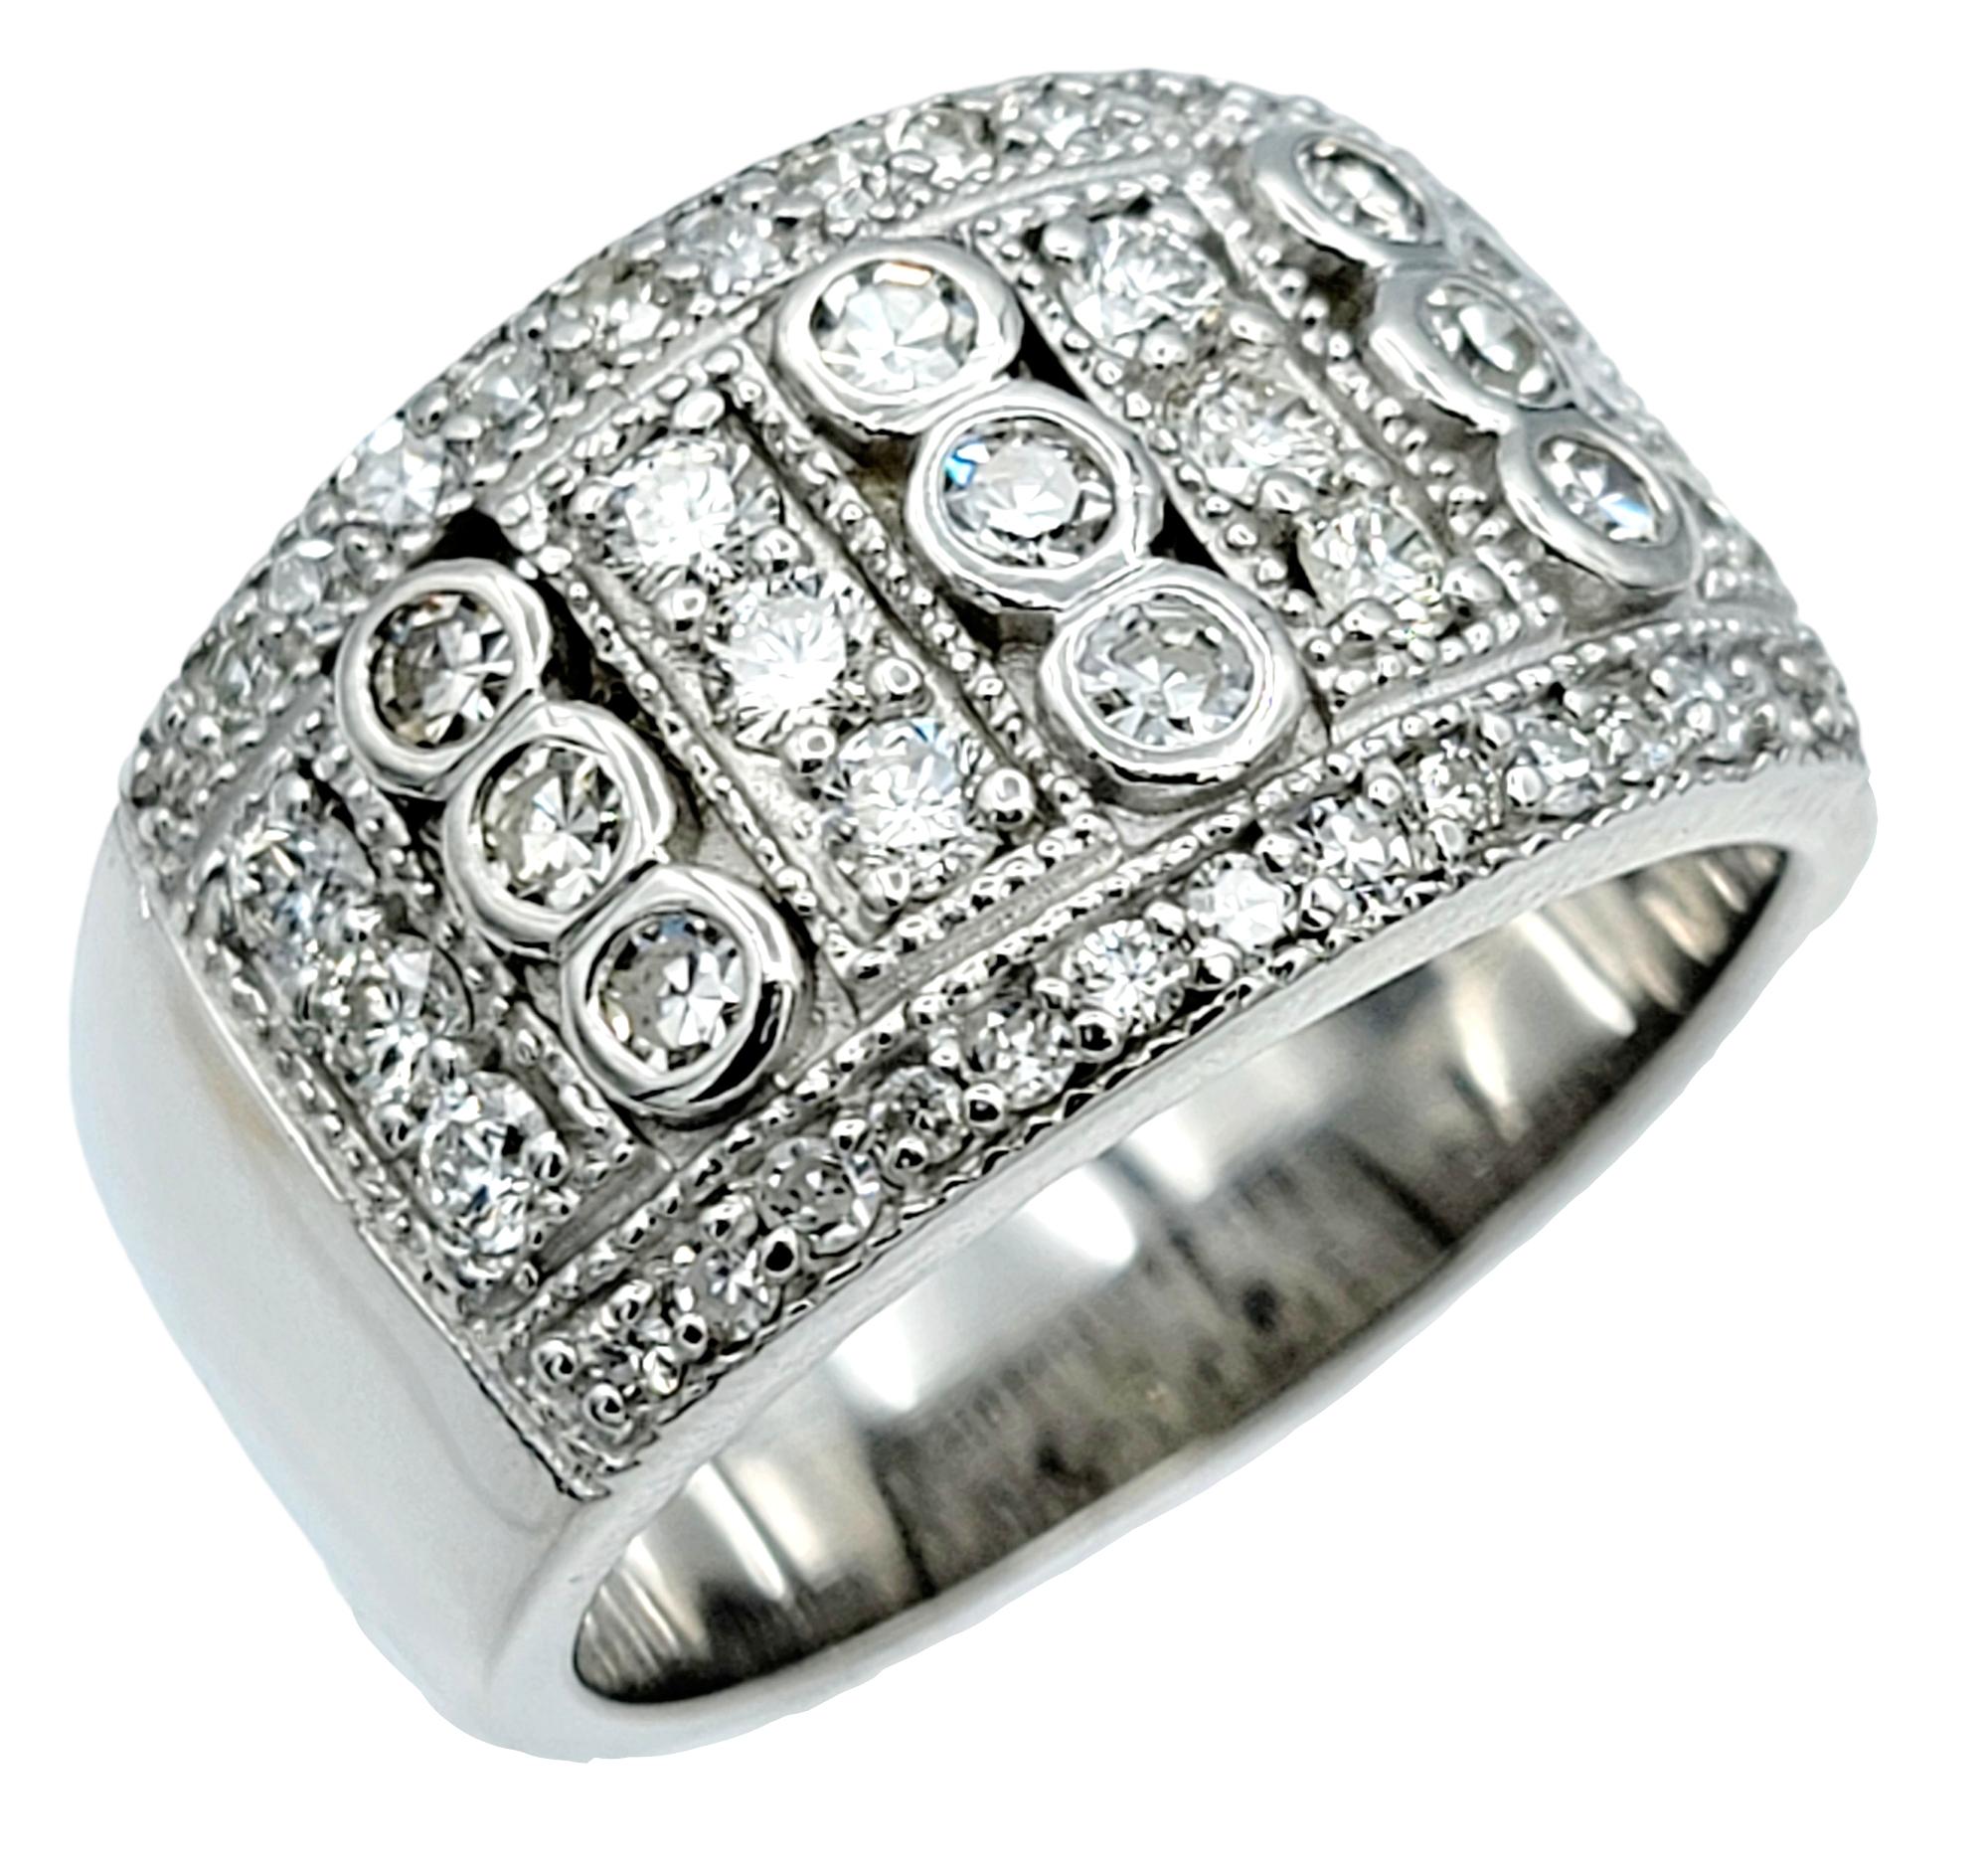 Ring size: 9.25

Introducing an exquisite multi-row diamond band ring, a masterpiece of timeless elegance and intricate craftsmanship. This stunning piece is a true testament to the artistry of fine jewelry, designed to captivate and